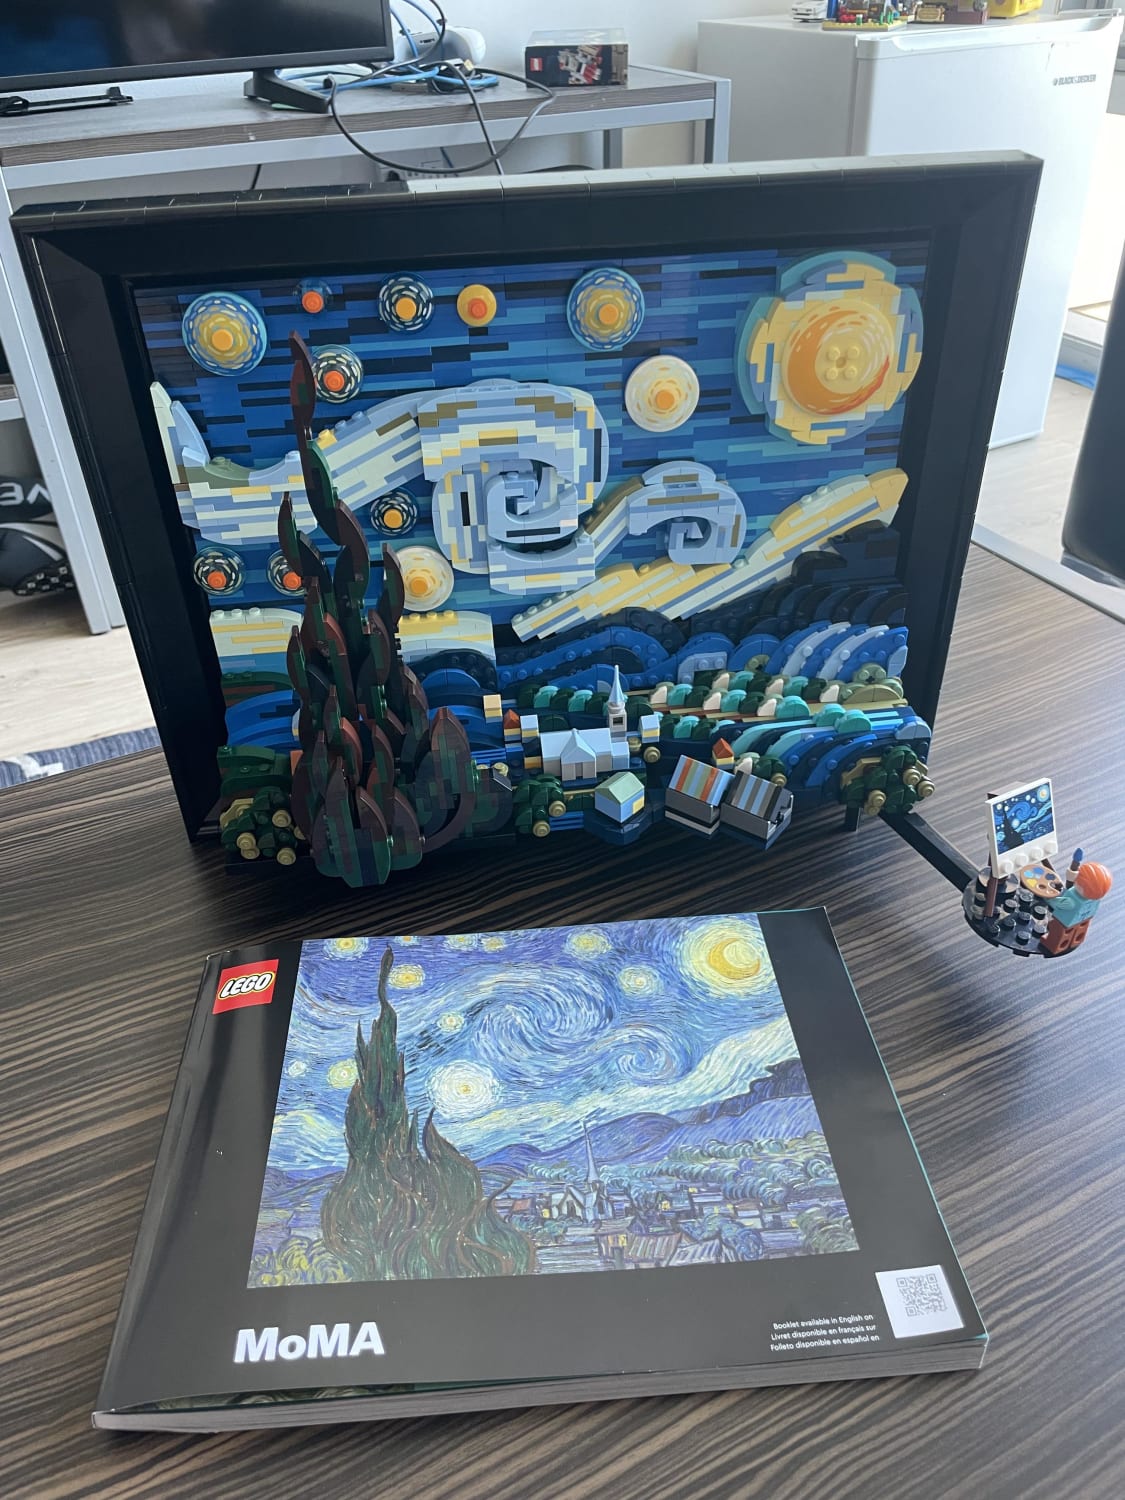 Just finished the Starry night